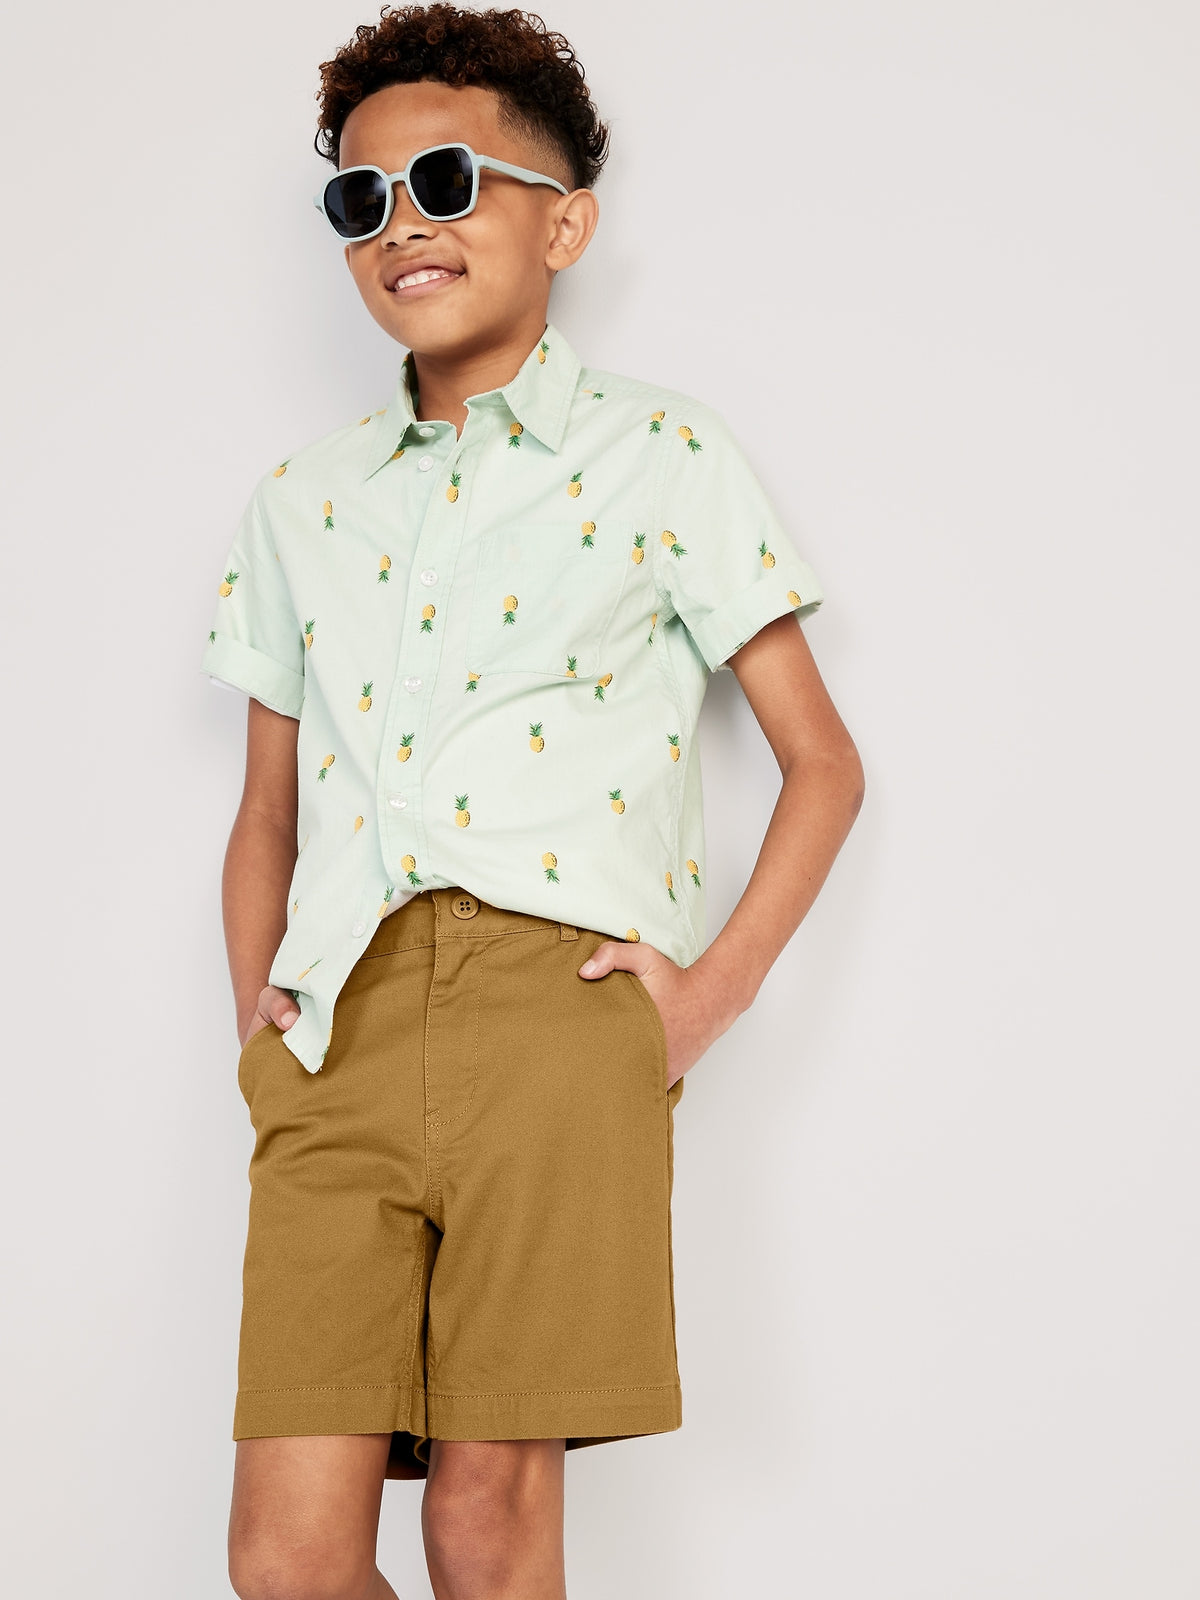 Built-In Flex Straight Twill Shorts for Boys (Above Knee) - Old Navy  Philippines